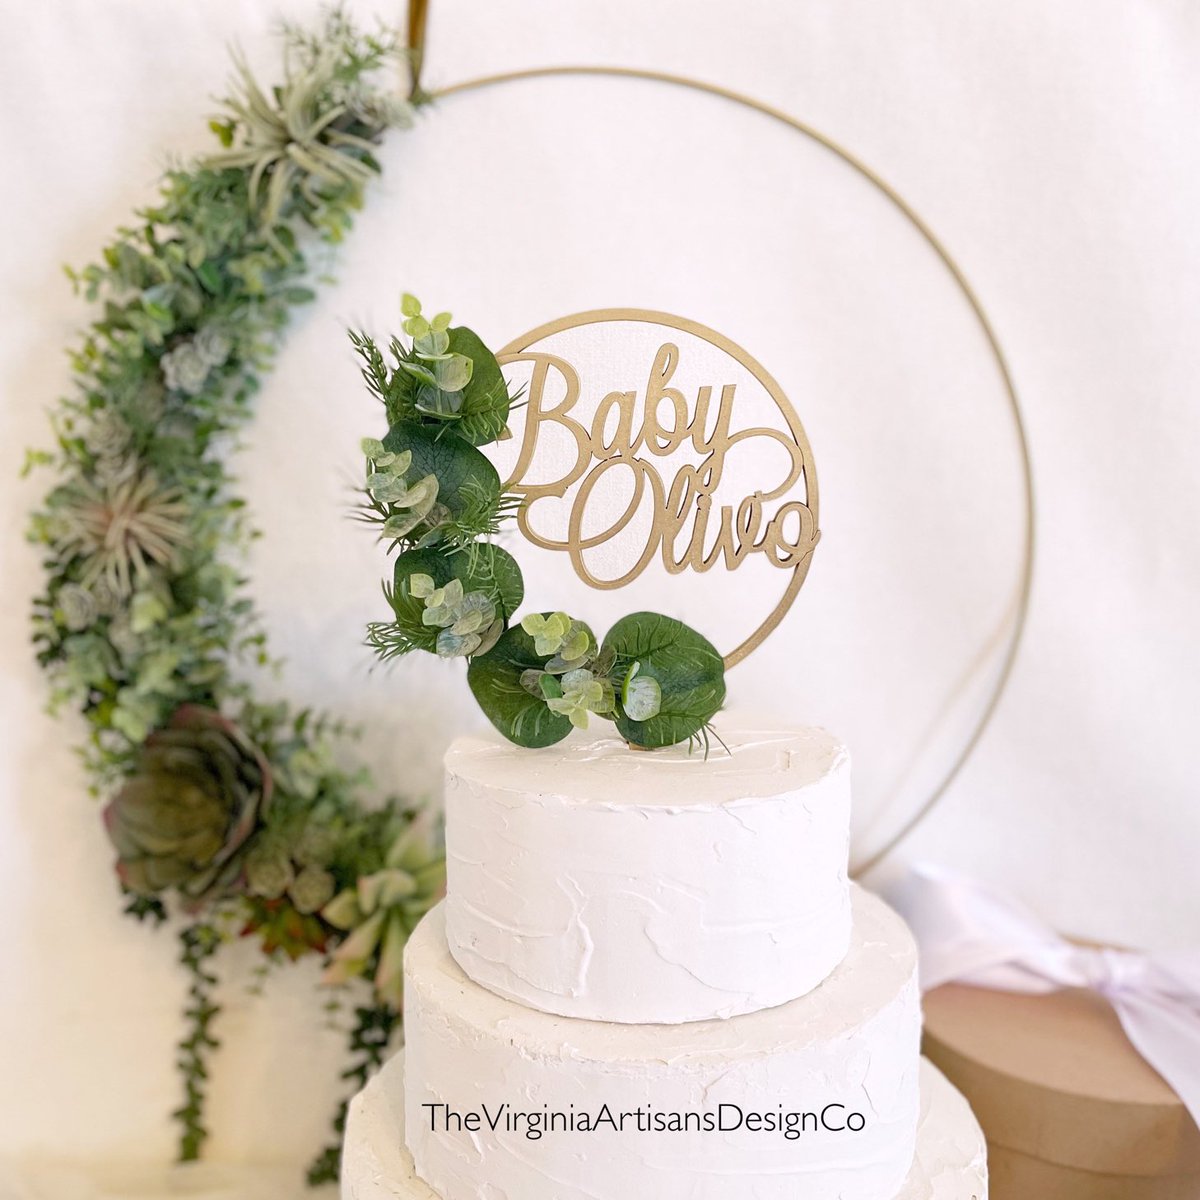 Excited to share this item from my #etsy shop: Personalized With Faux Greenery Cake Topper - Cake Topper - Cake Topper, Cake Topper #babyshower #green #greenbabyshower #eucalyptusbaby #greeneryparty #greenerybabyshower #floralbabyshower #eucalyptus etsy.me/3Zz73RY